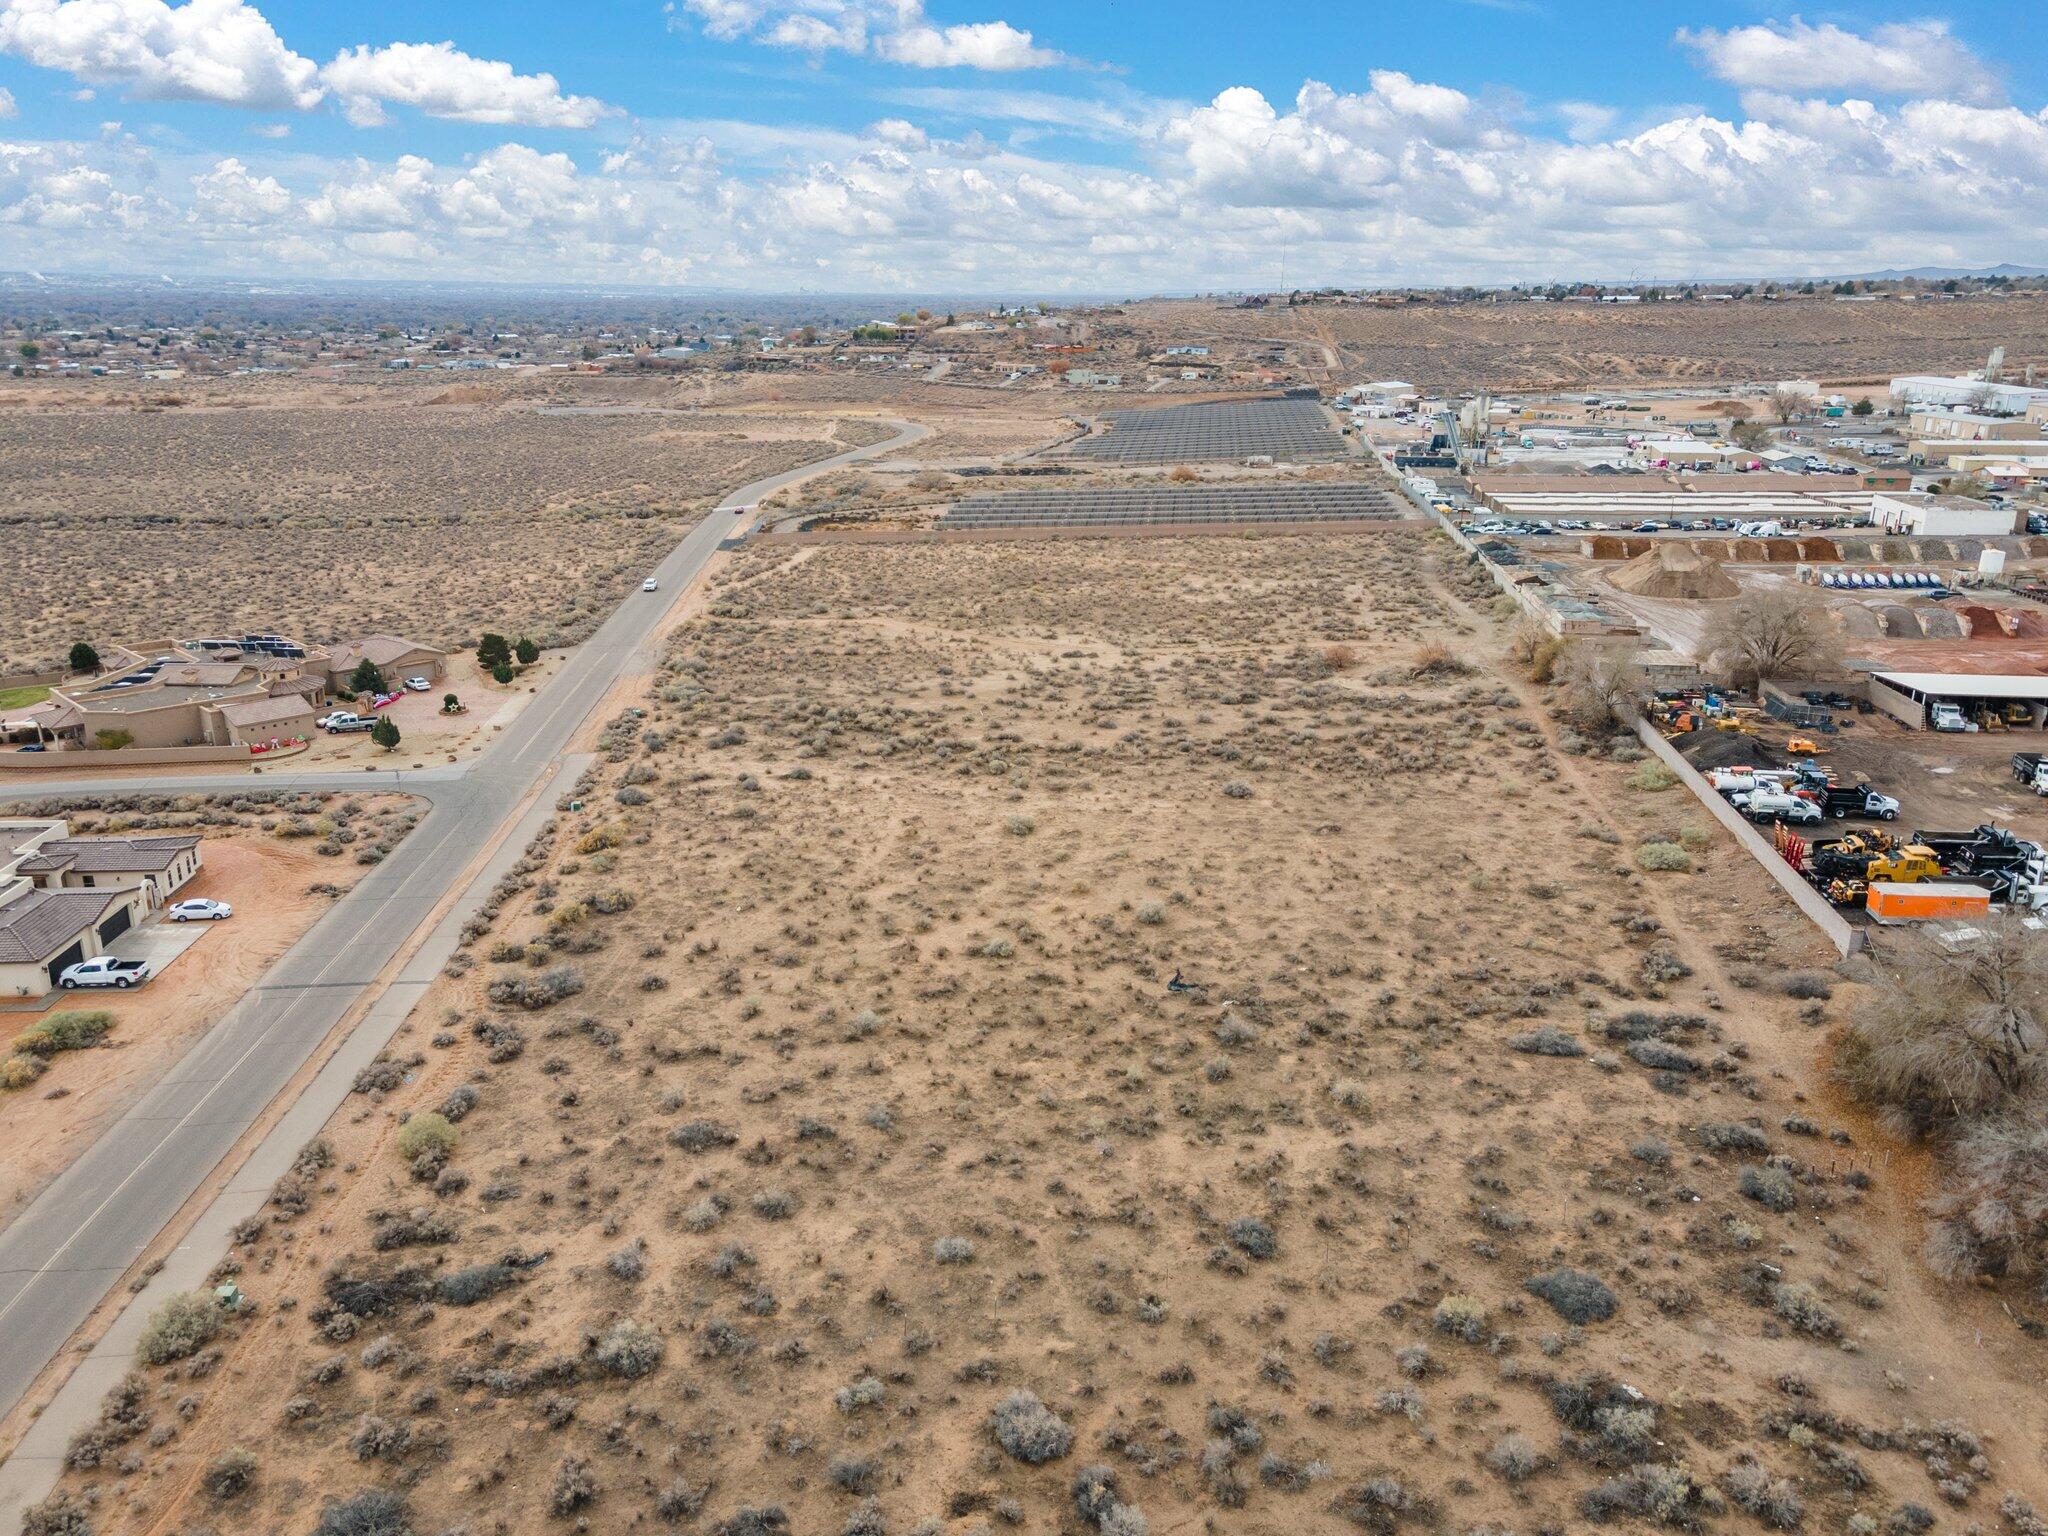 Lot 4 Don Julio Road, Corrales, New Mexico 87048, ,Land,For Sale,Lot 4 Don Julio Road,1053856